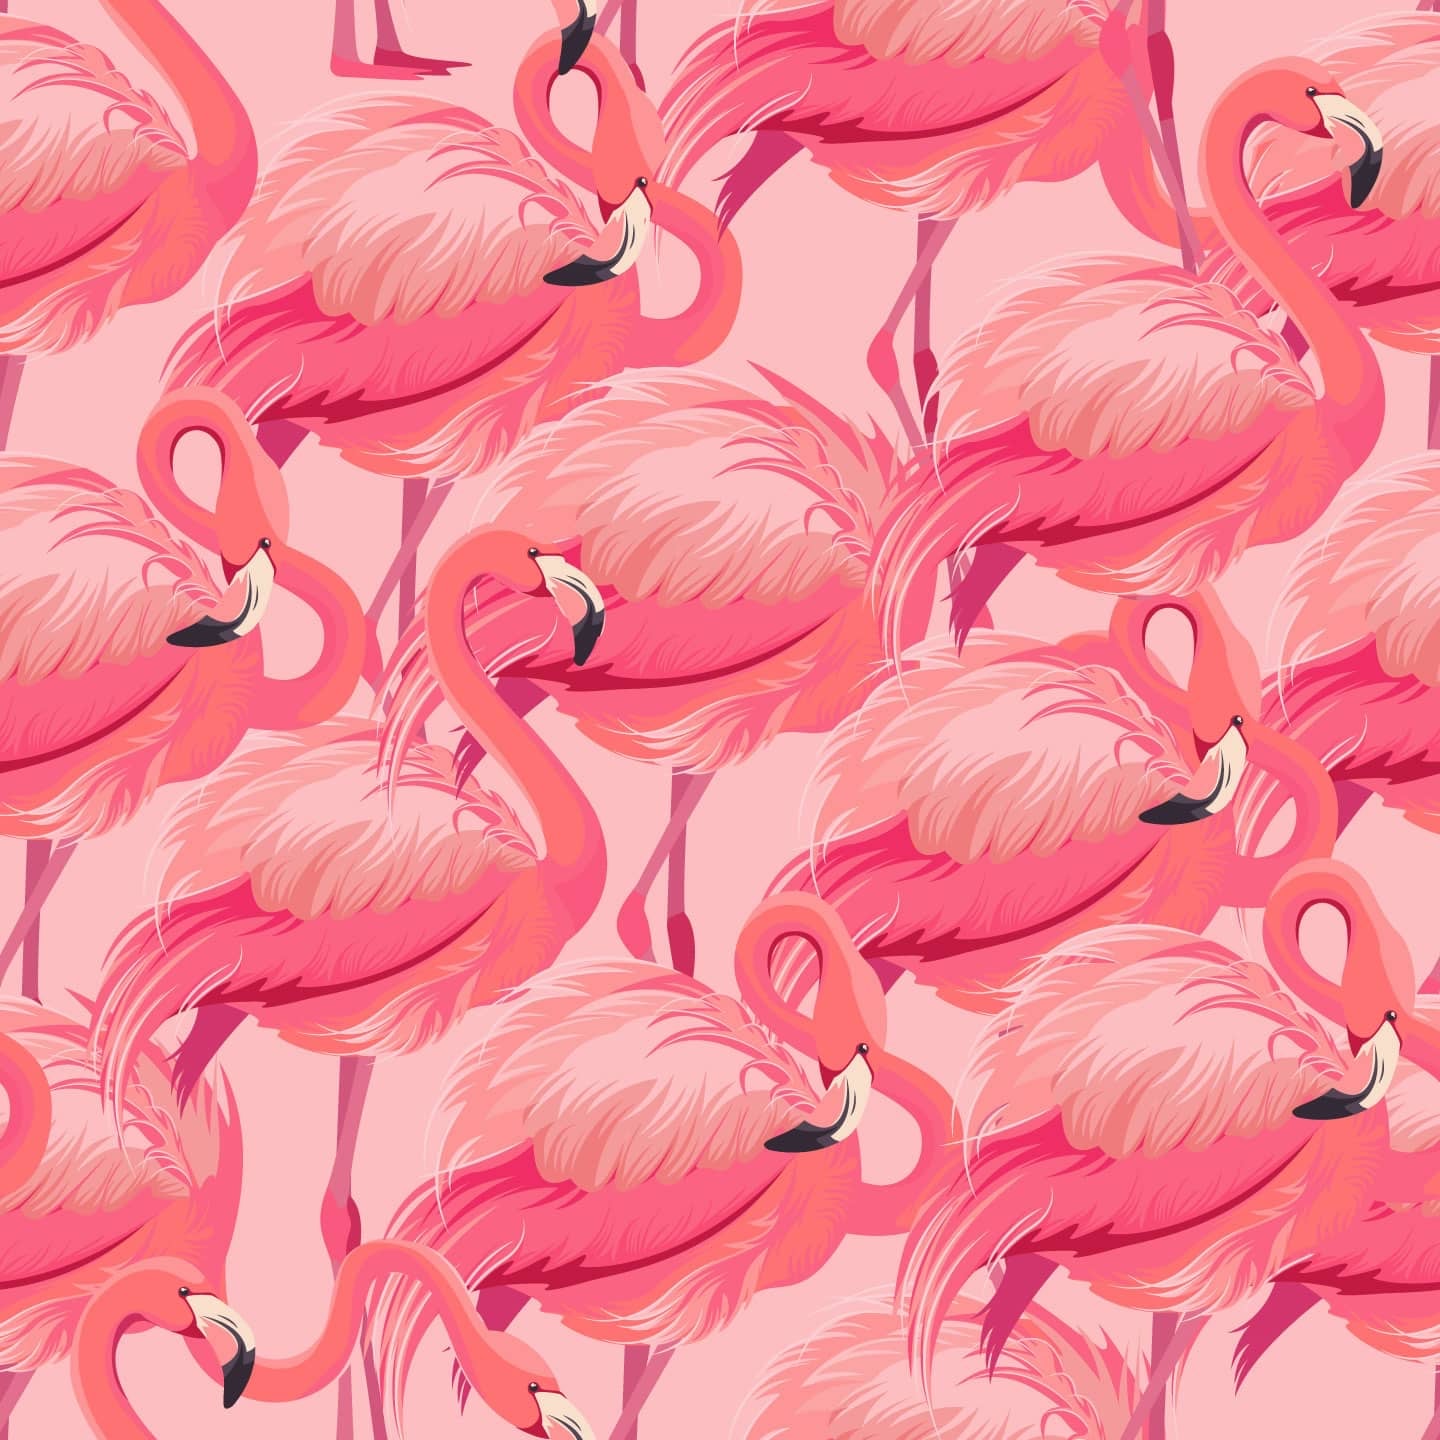 Flamingo Peel-and-Stick or Traditional Wallpaper for your Nursery, Home, Camper van, or Vintage Trailer,